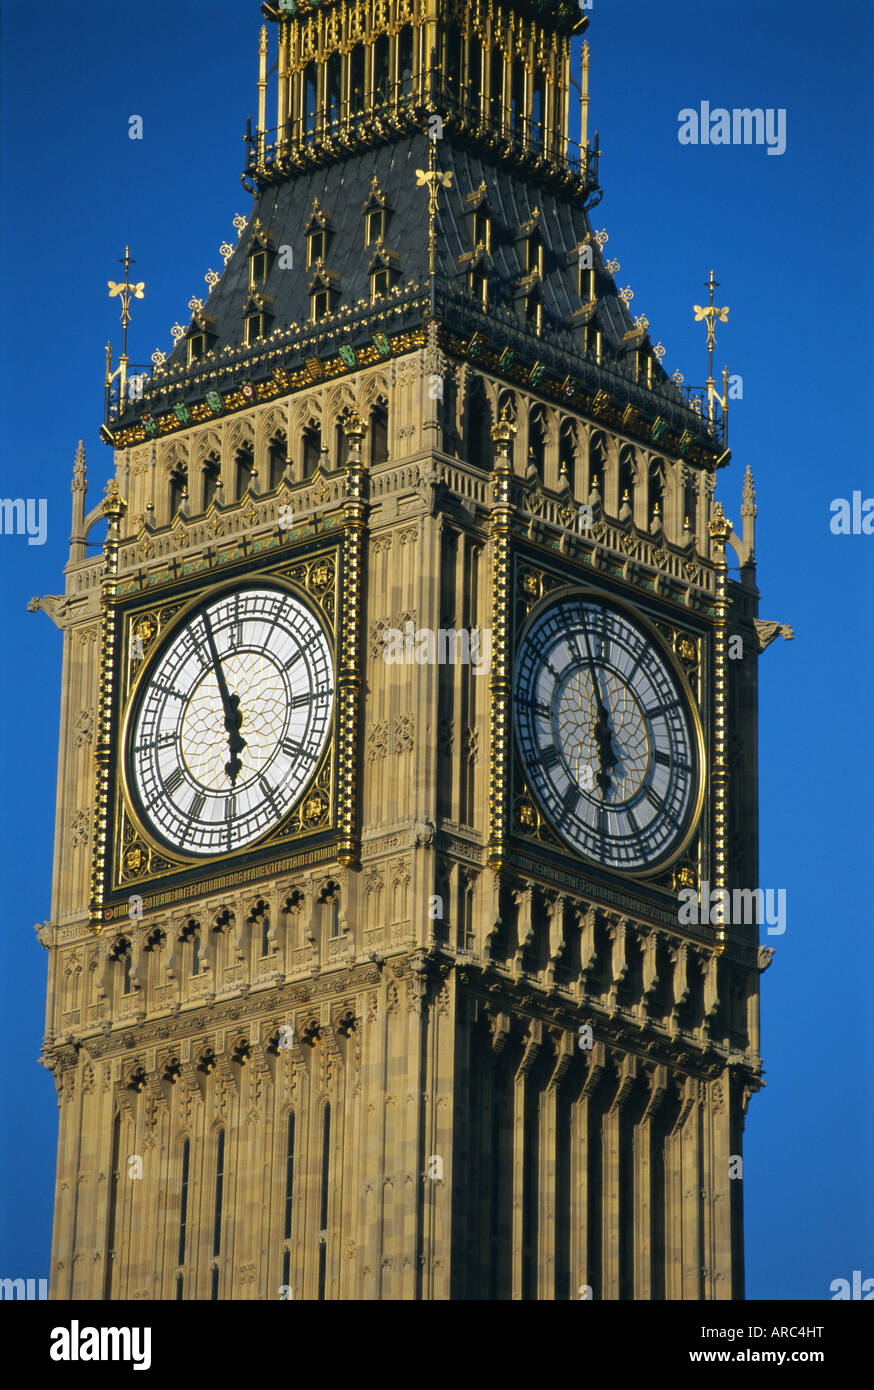 Big Ben, Houses of Parliament, Westminster, Londres, Angleterre, Royaume-Uni, Europe Banque D'Images